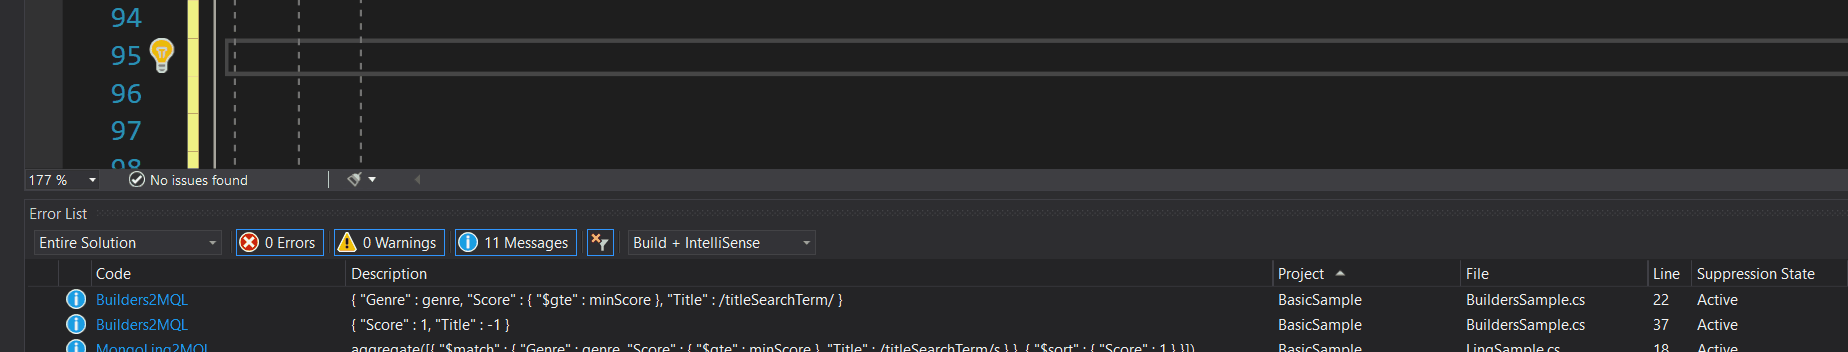 GIF showing unsupported LINQ expression being implemented. After being written, unsupported code is correctly highlighted; tooltip is shown warning developer of the unsupported expression and the warning is added to the Error List panel of the IDE.